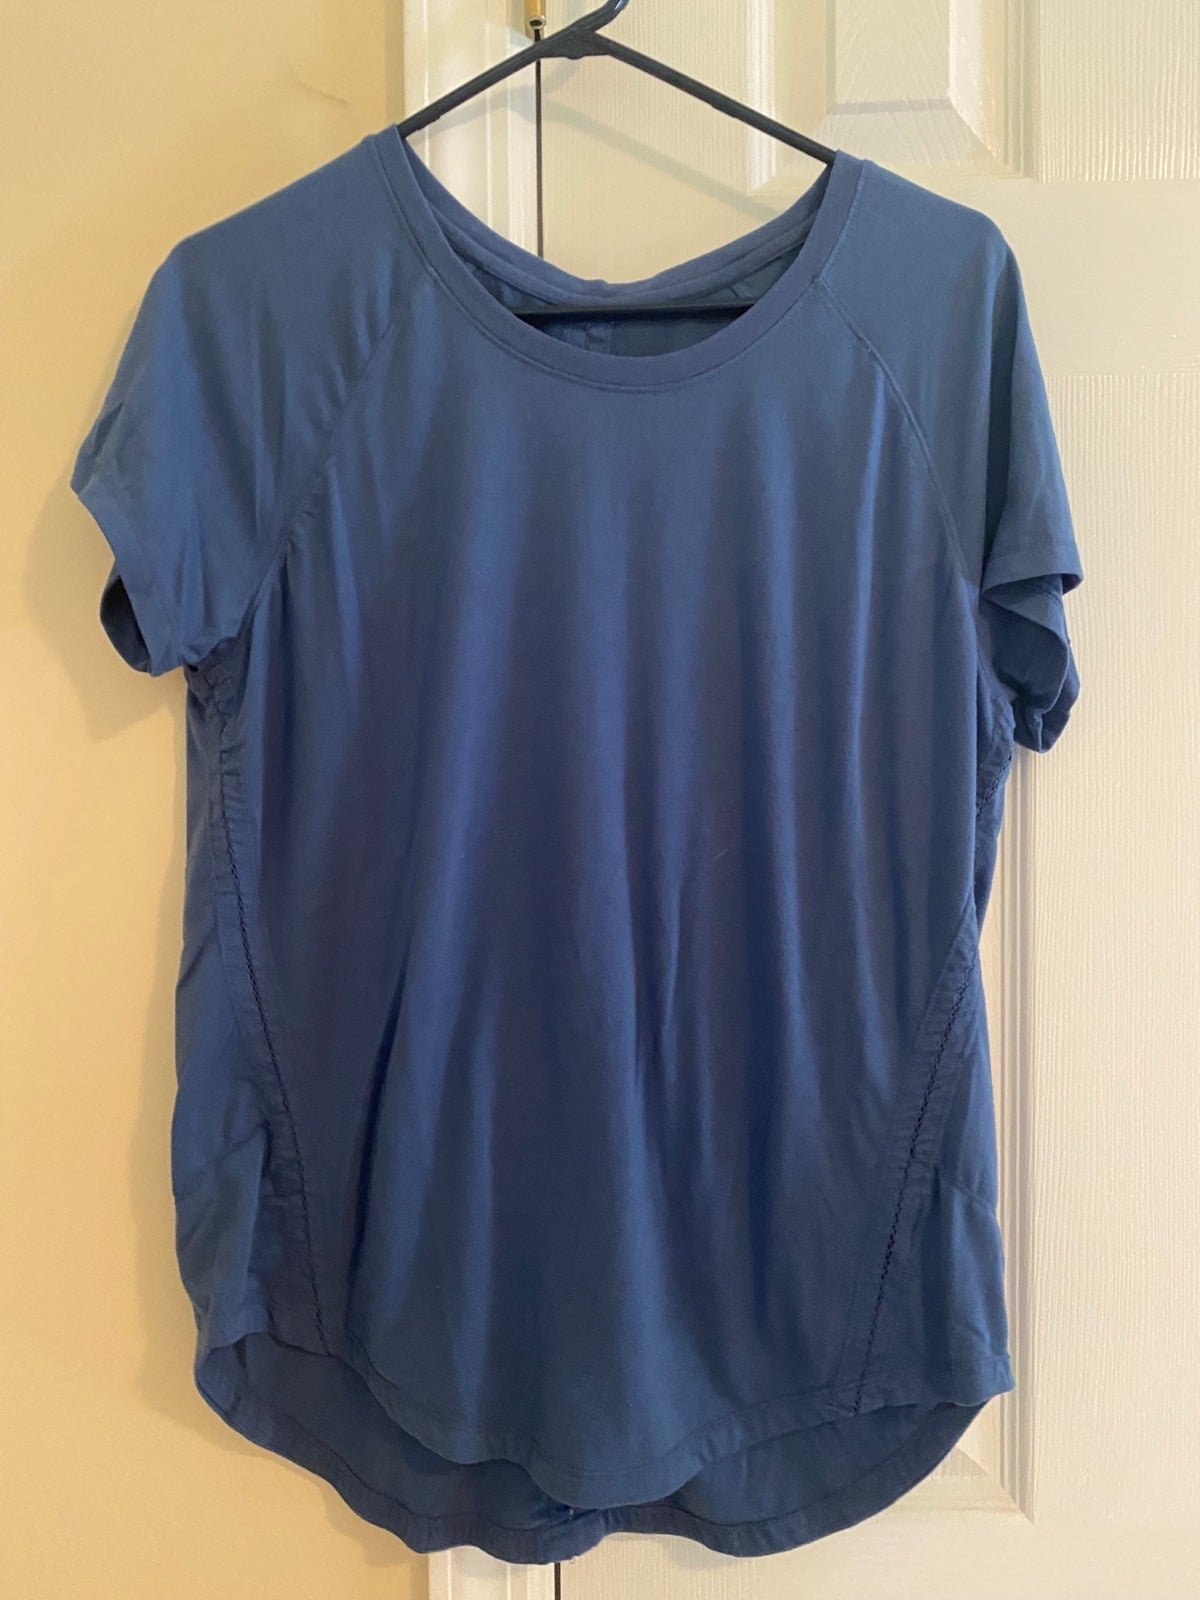 Personality womans blue loose fit  shirt FvoIOzy50 hot 